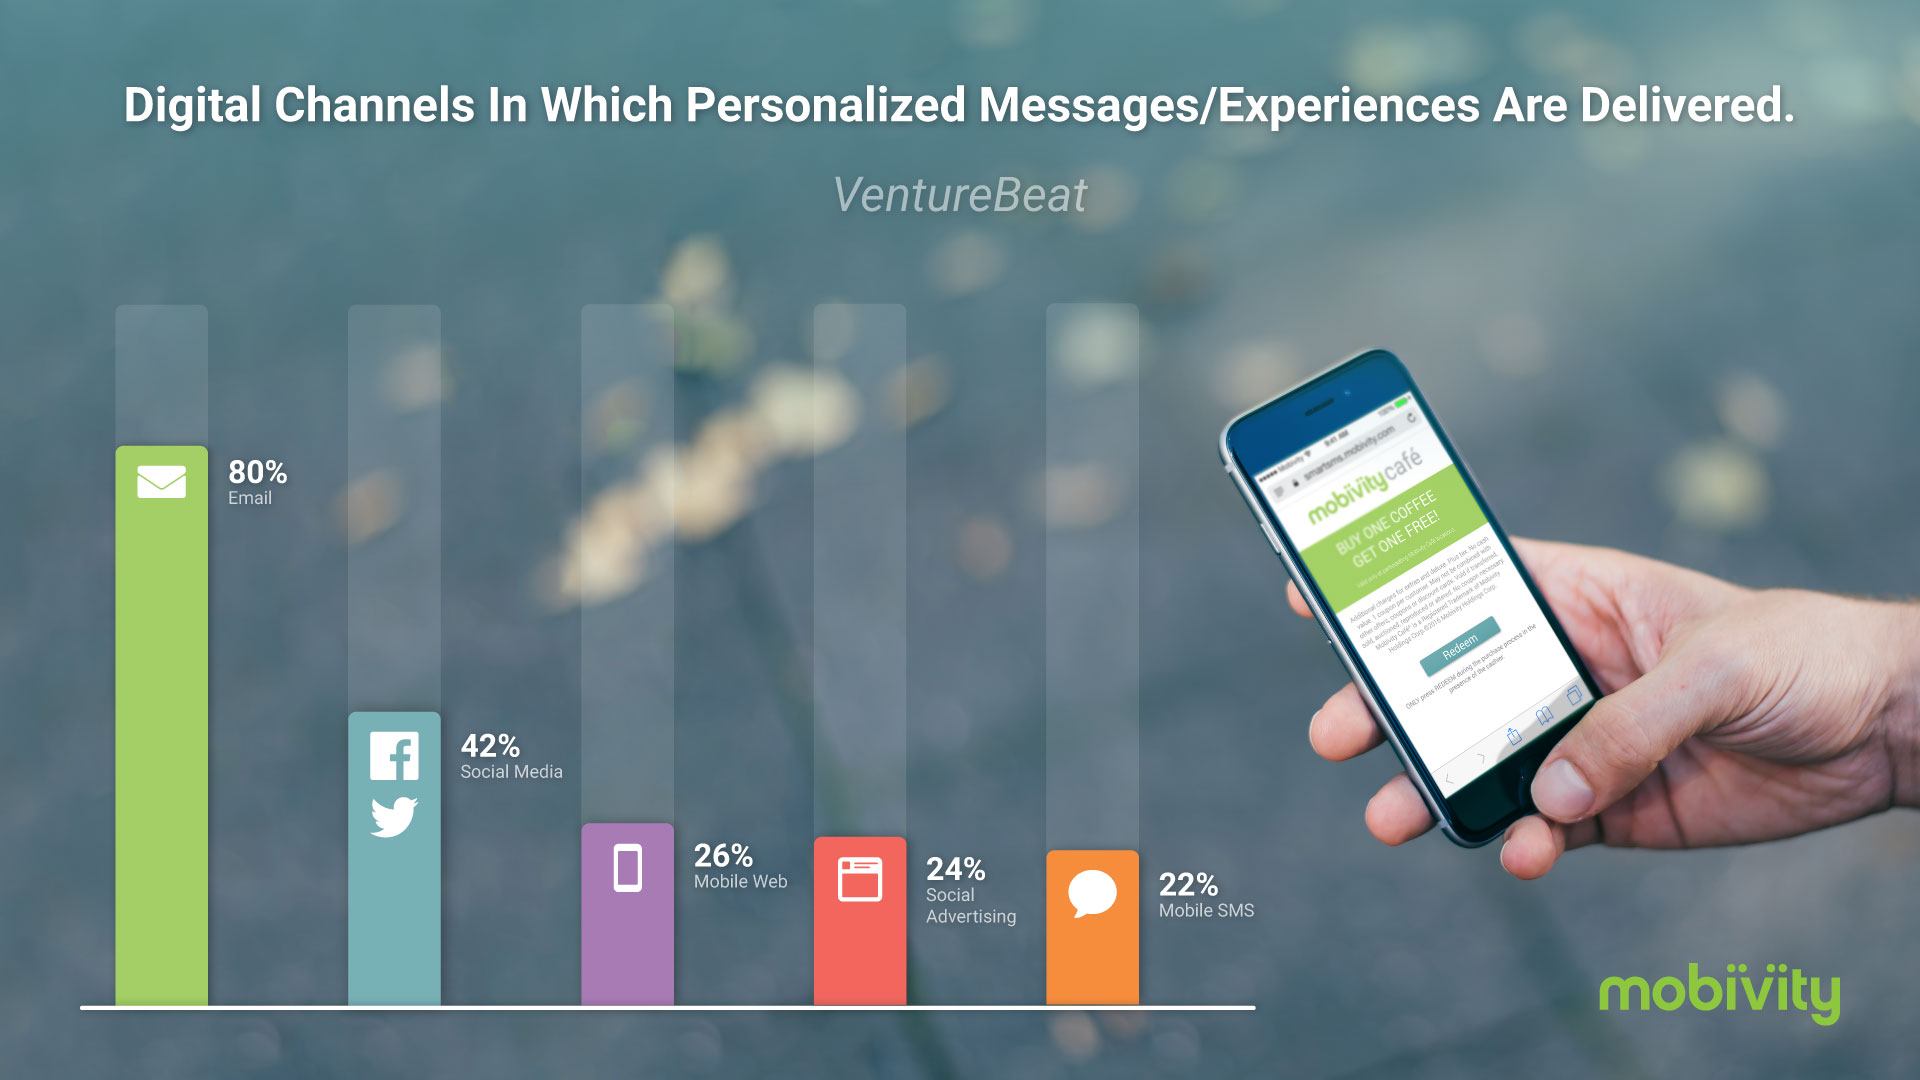 Digital Channels in Which Personalized Messages/Experiences Are Delivered